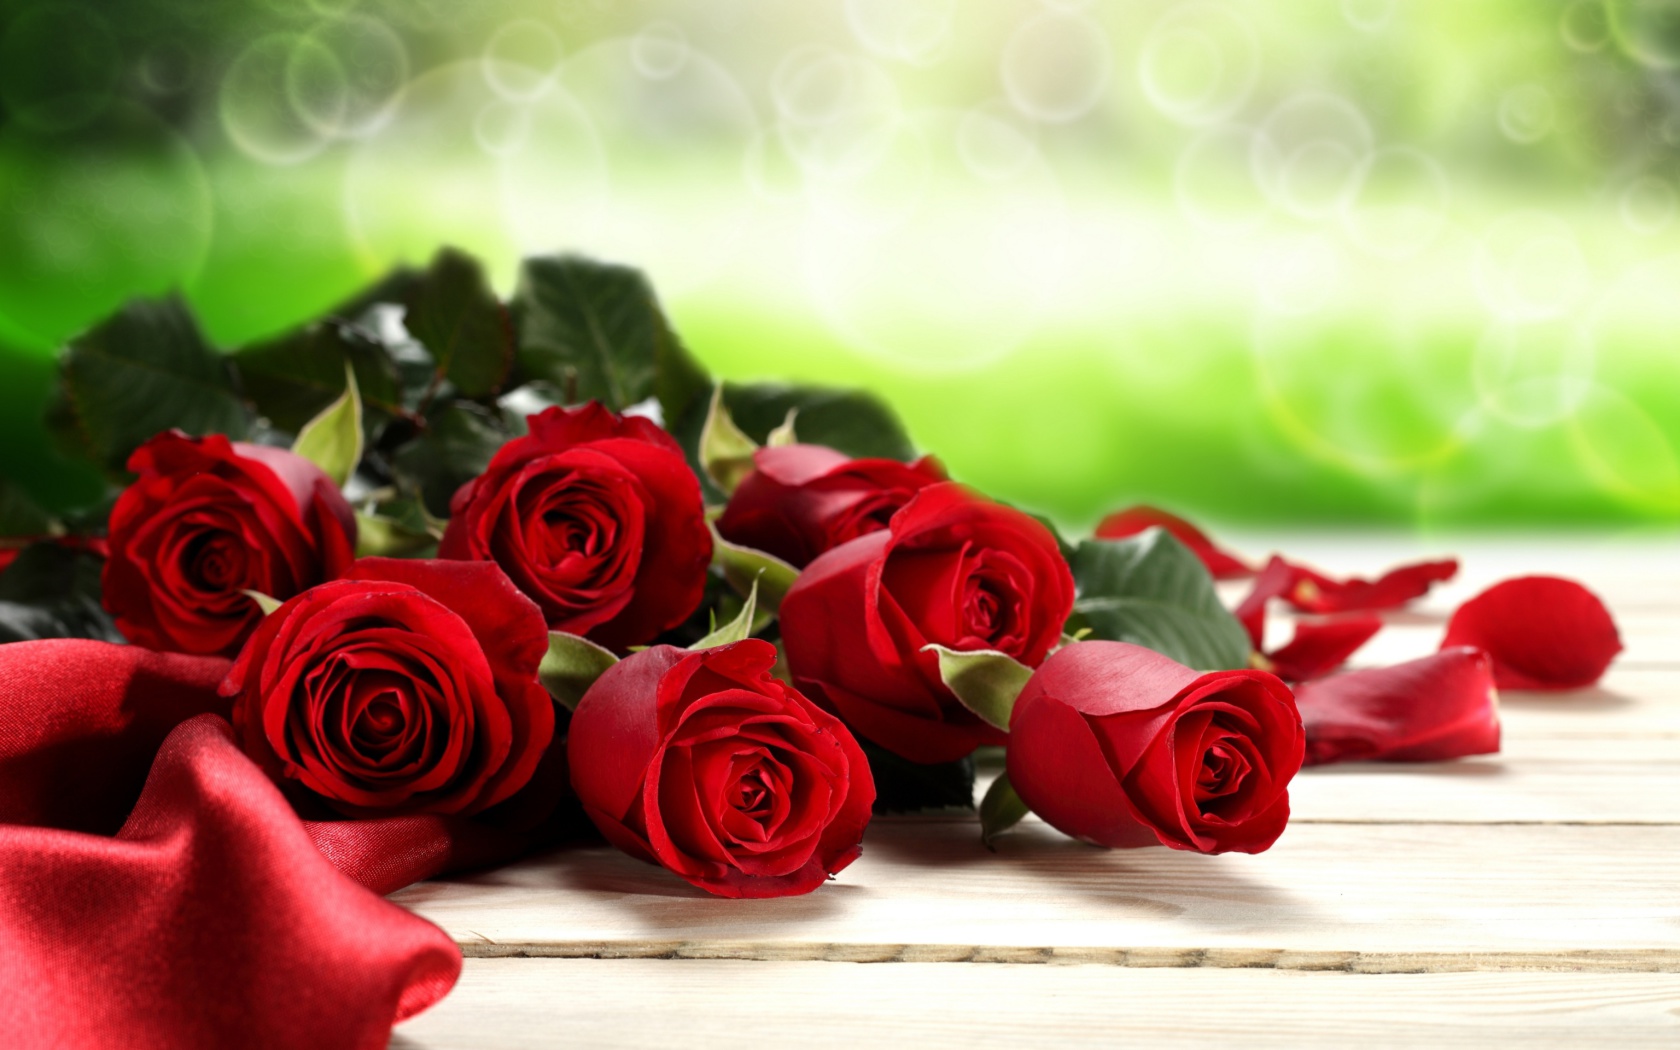 Red Roses for Valentines Day wallpaper 1680x1050